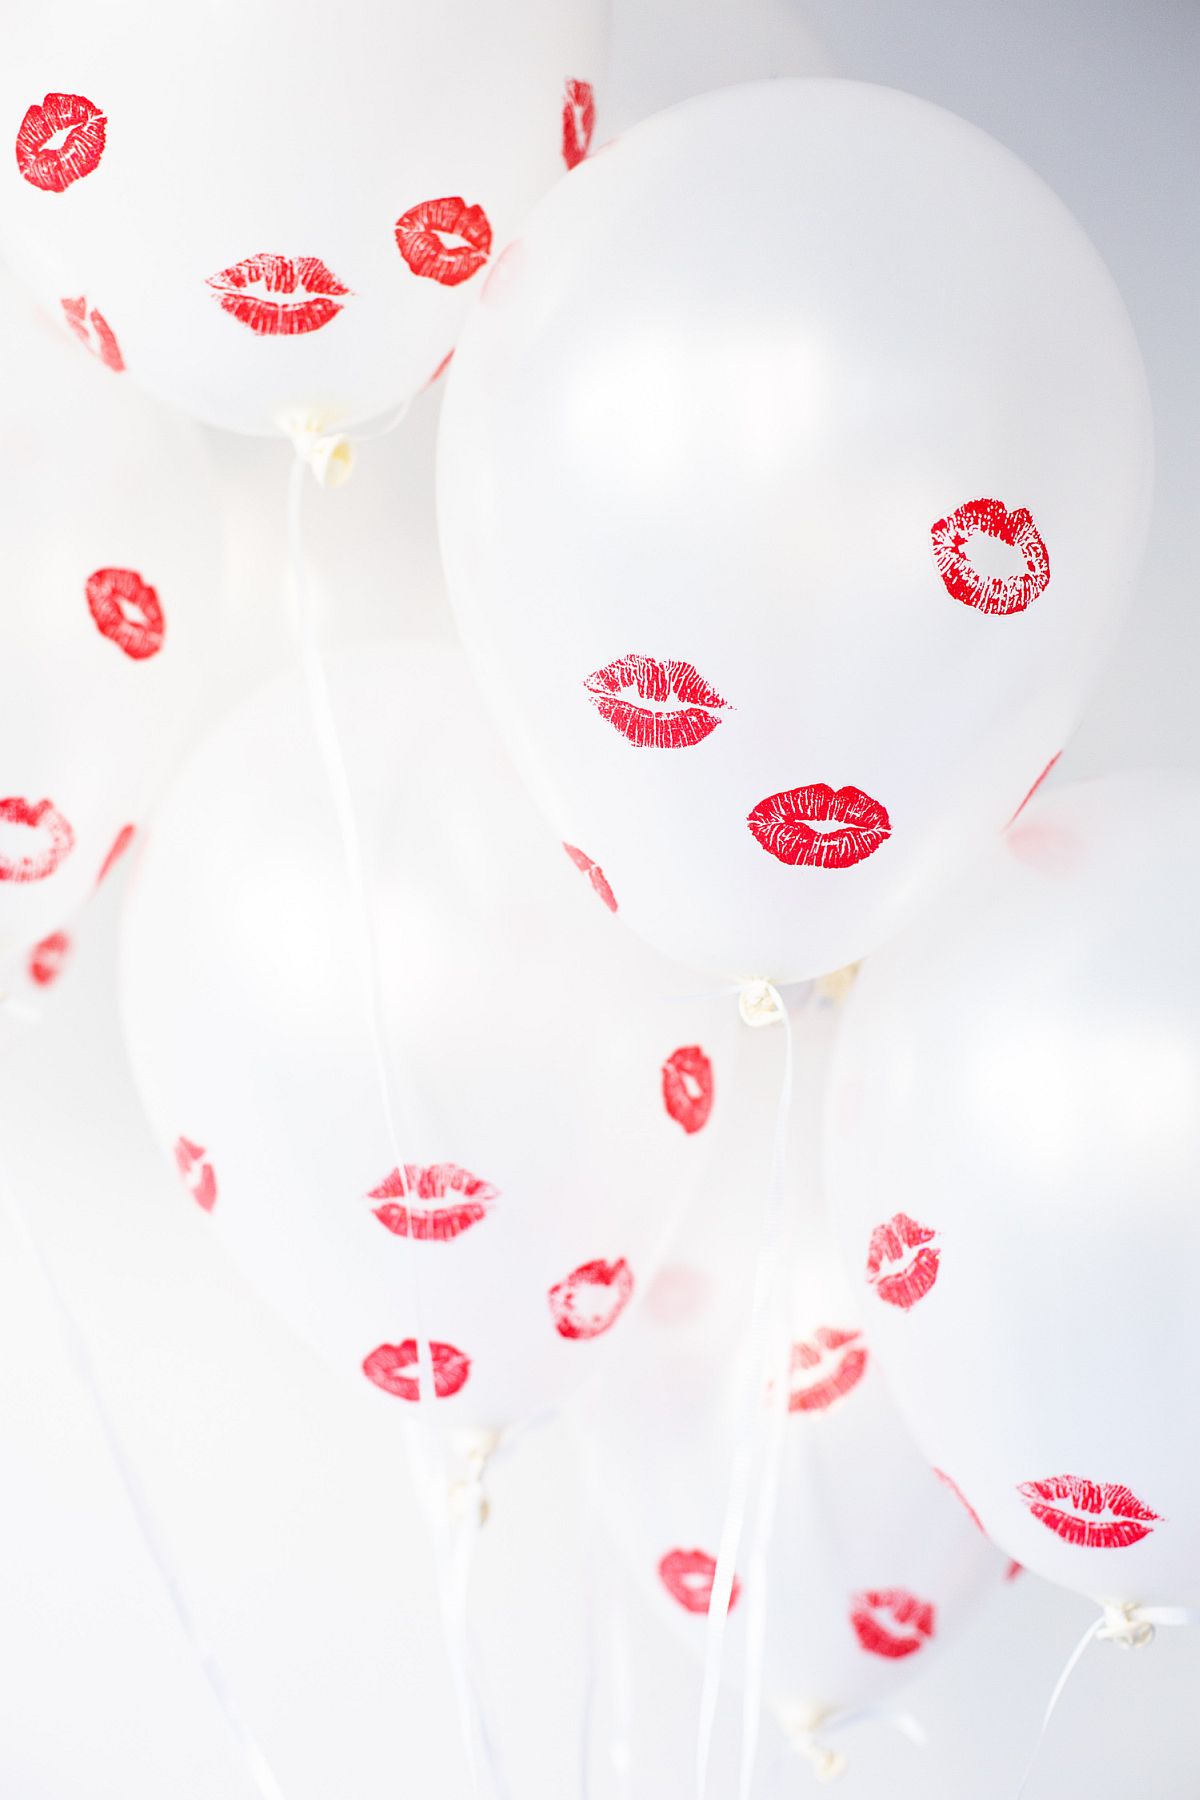 Fun-and-easy-to-make-DIY-Kissed-Balloons-from-Balloon-Time